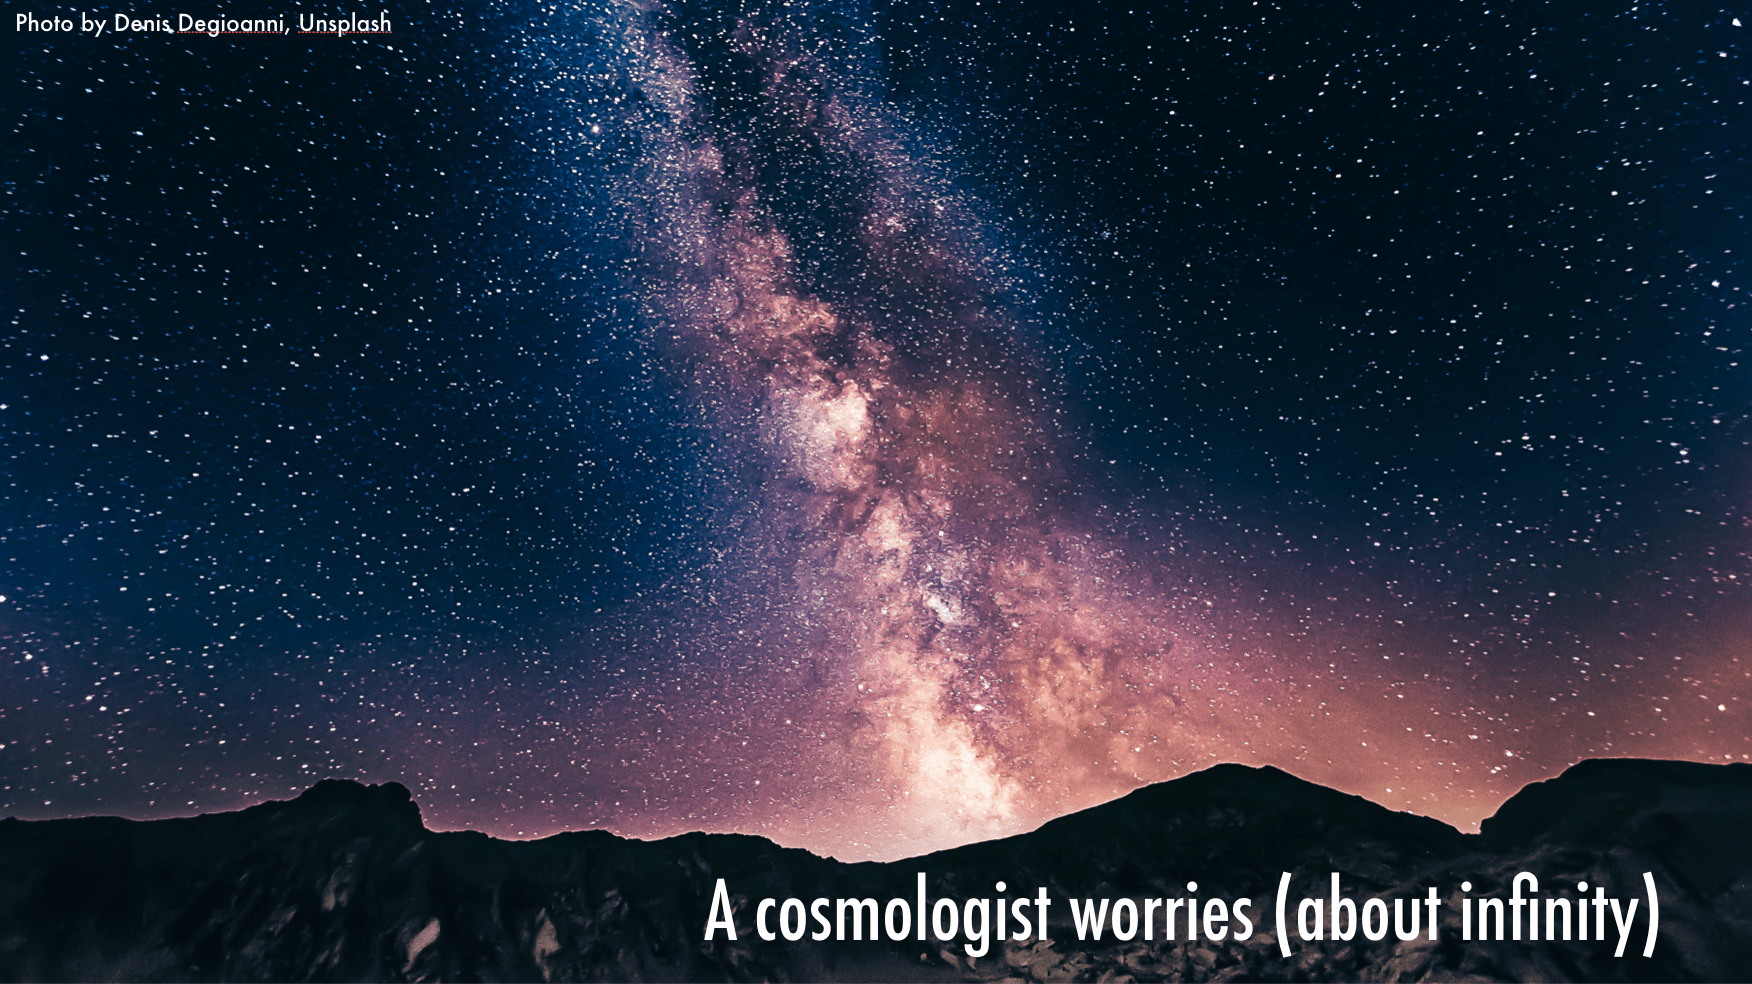 A cosmologist worries (about infinity)